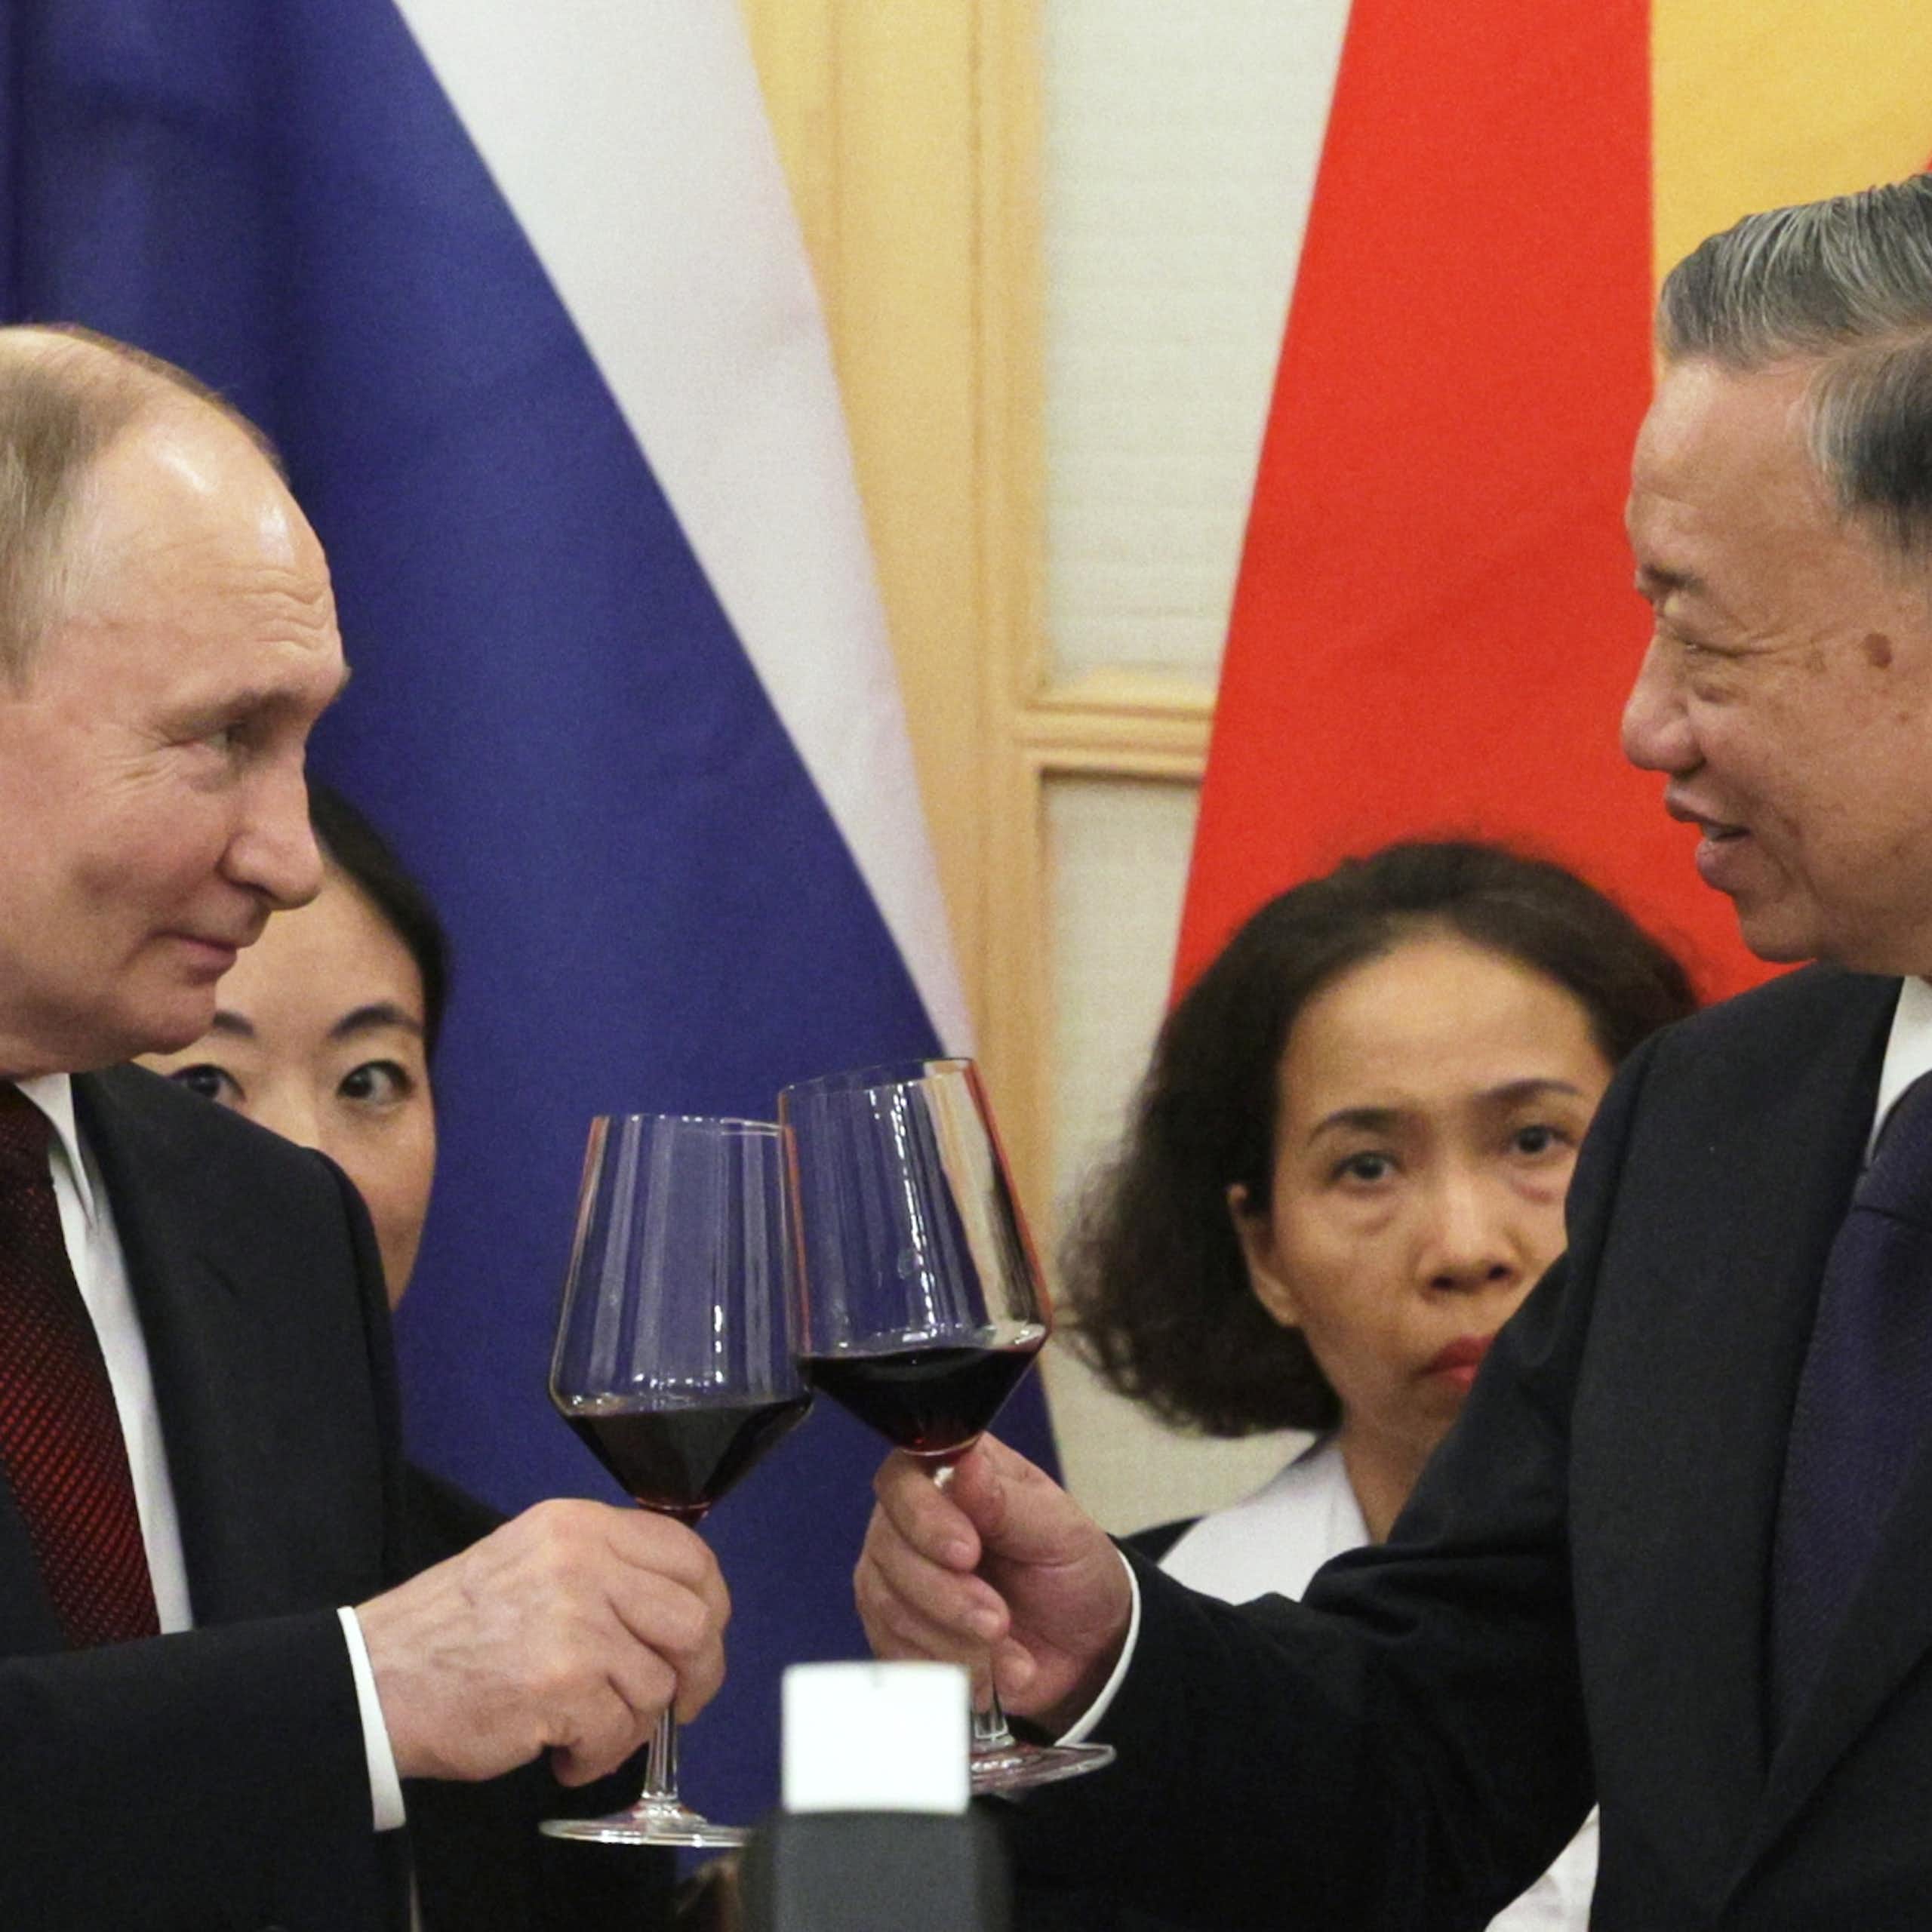 Putin and the Vietnamese president toast one another with a glass of wine in hand.